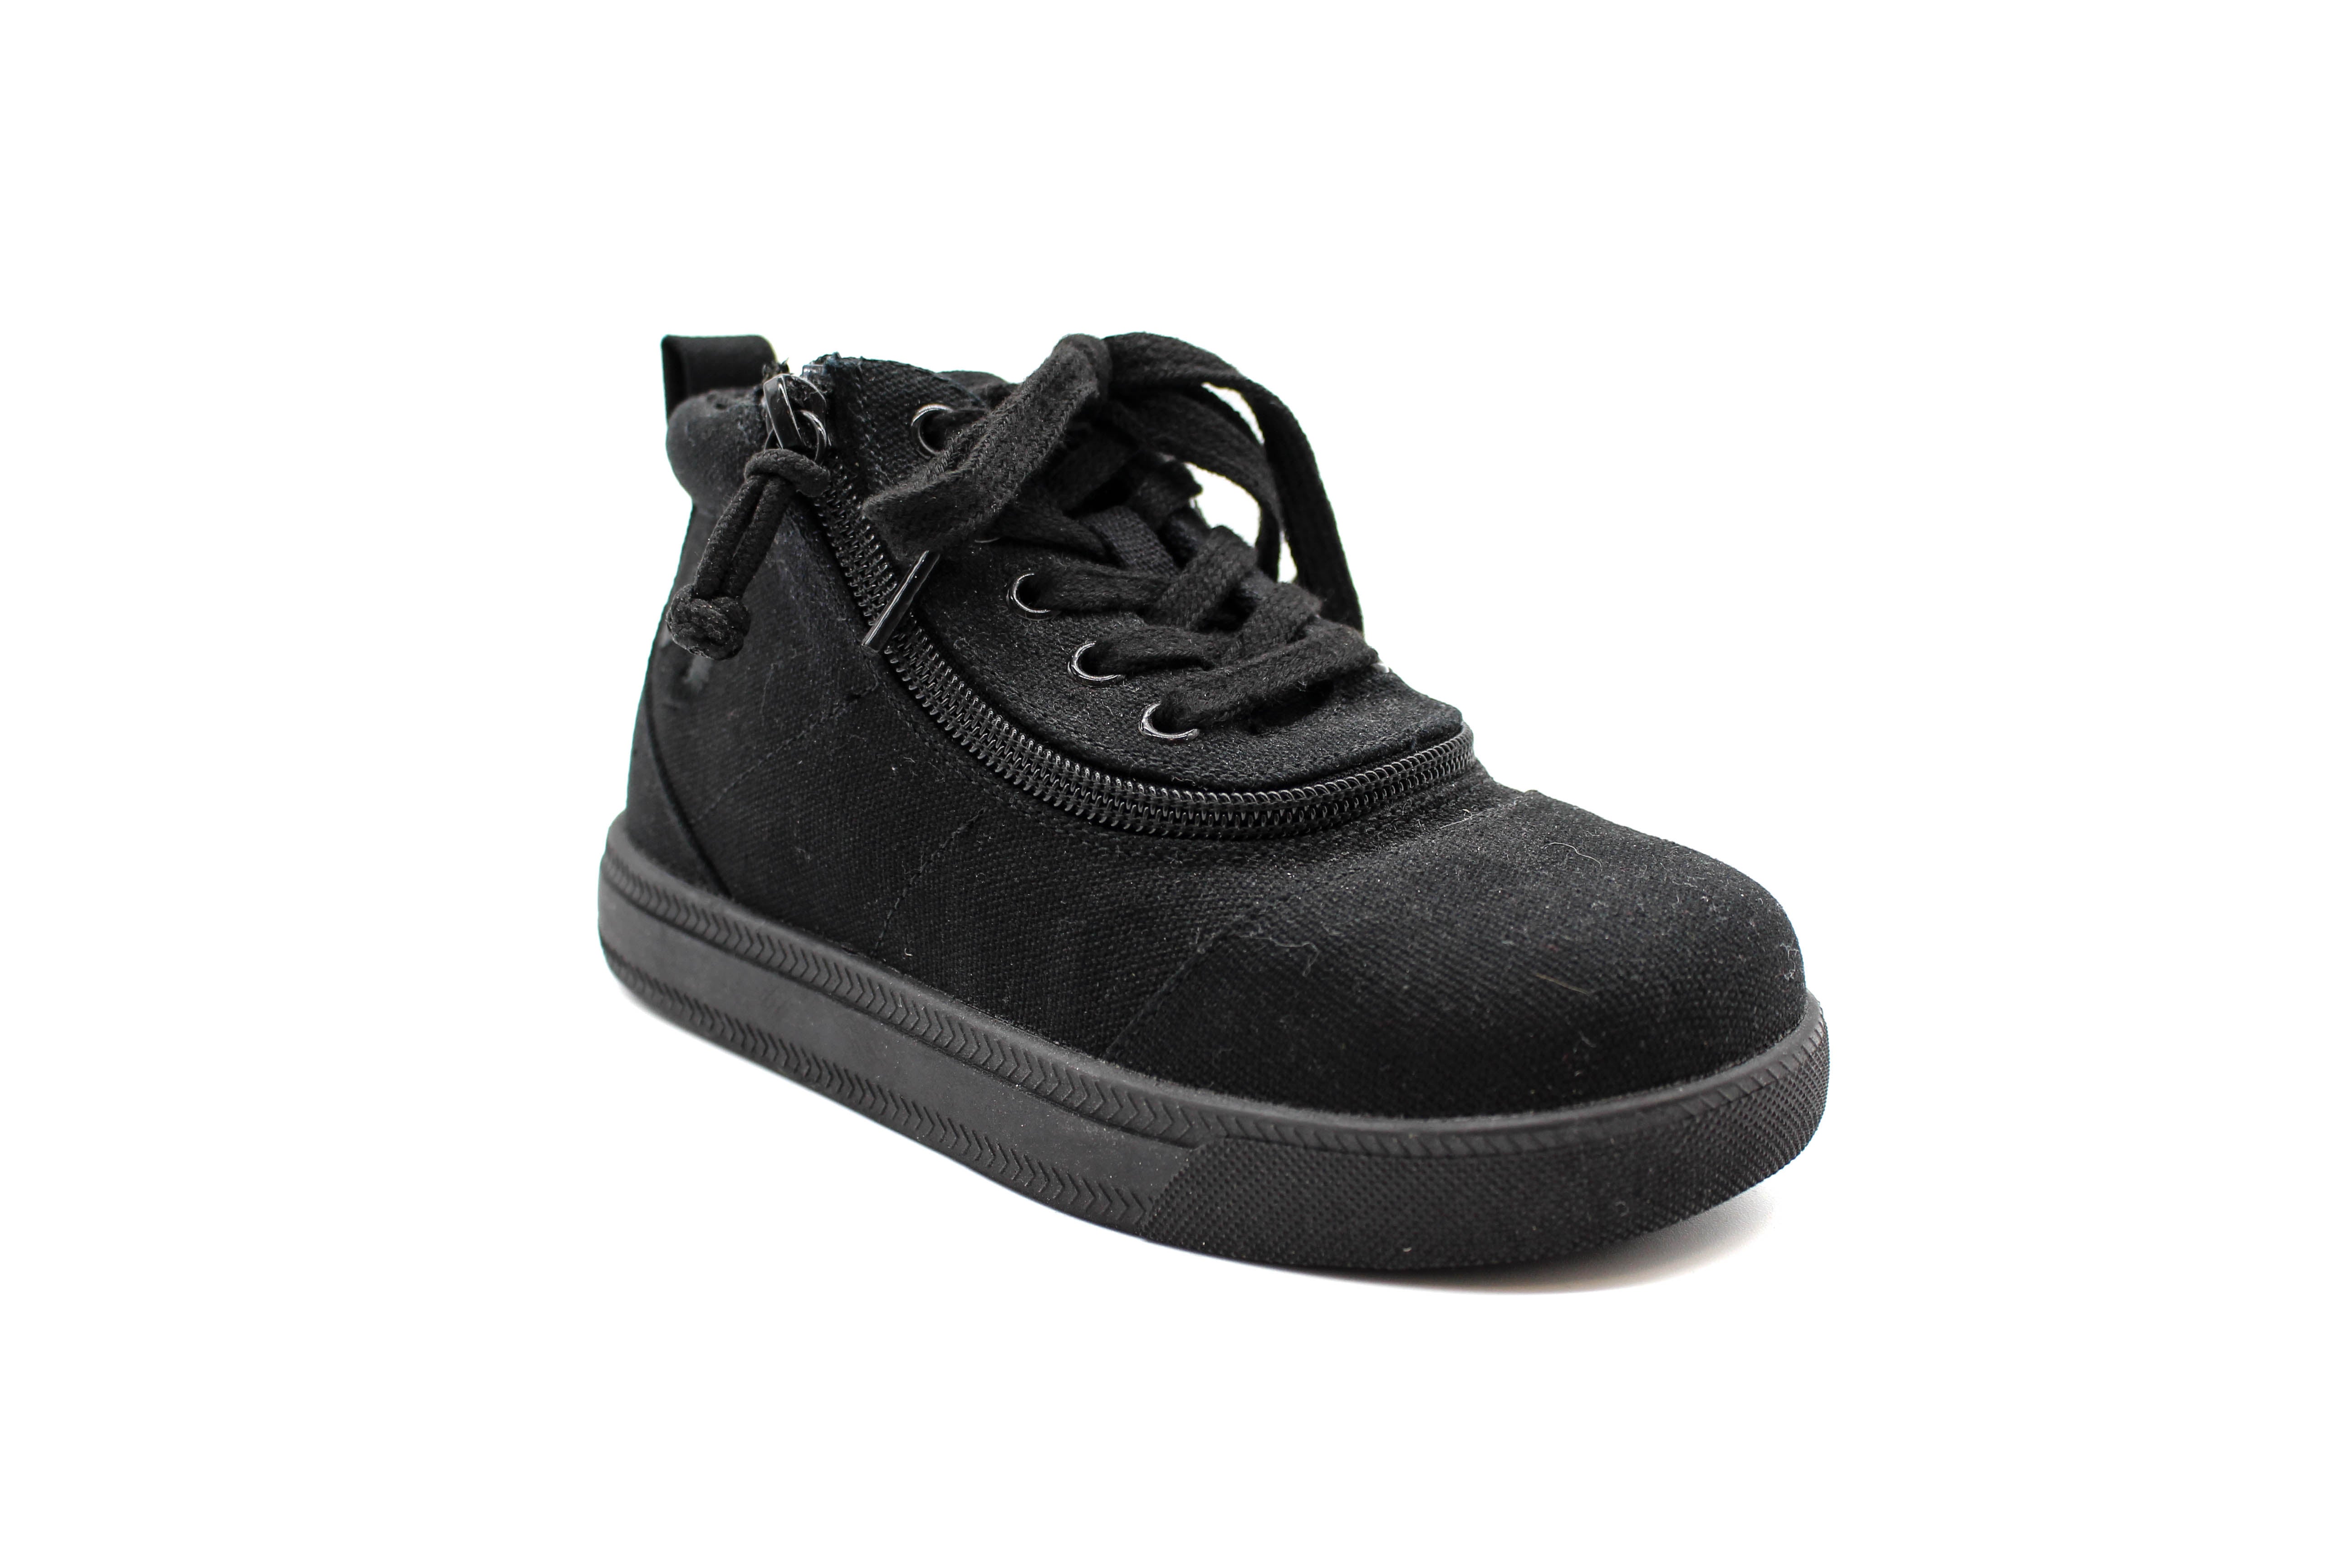 BILLY Black to the Floor D|R Short Wrap High Tops